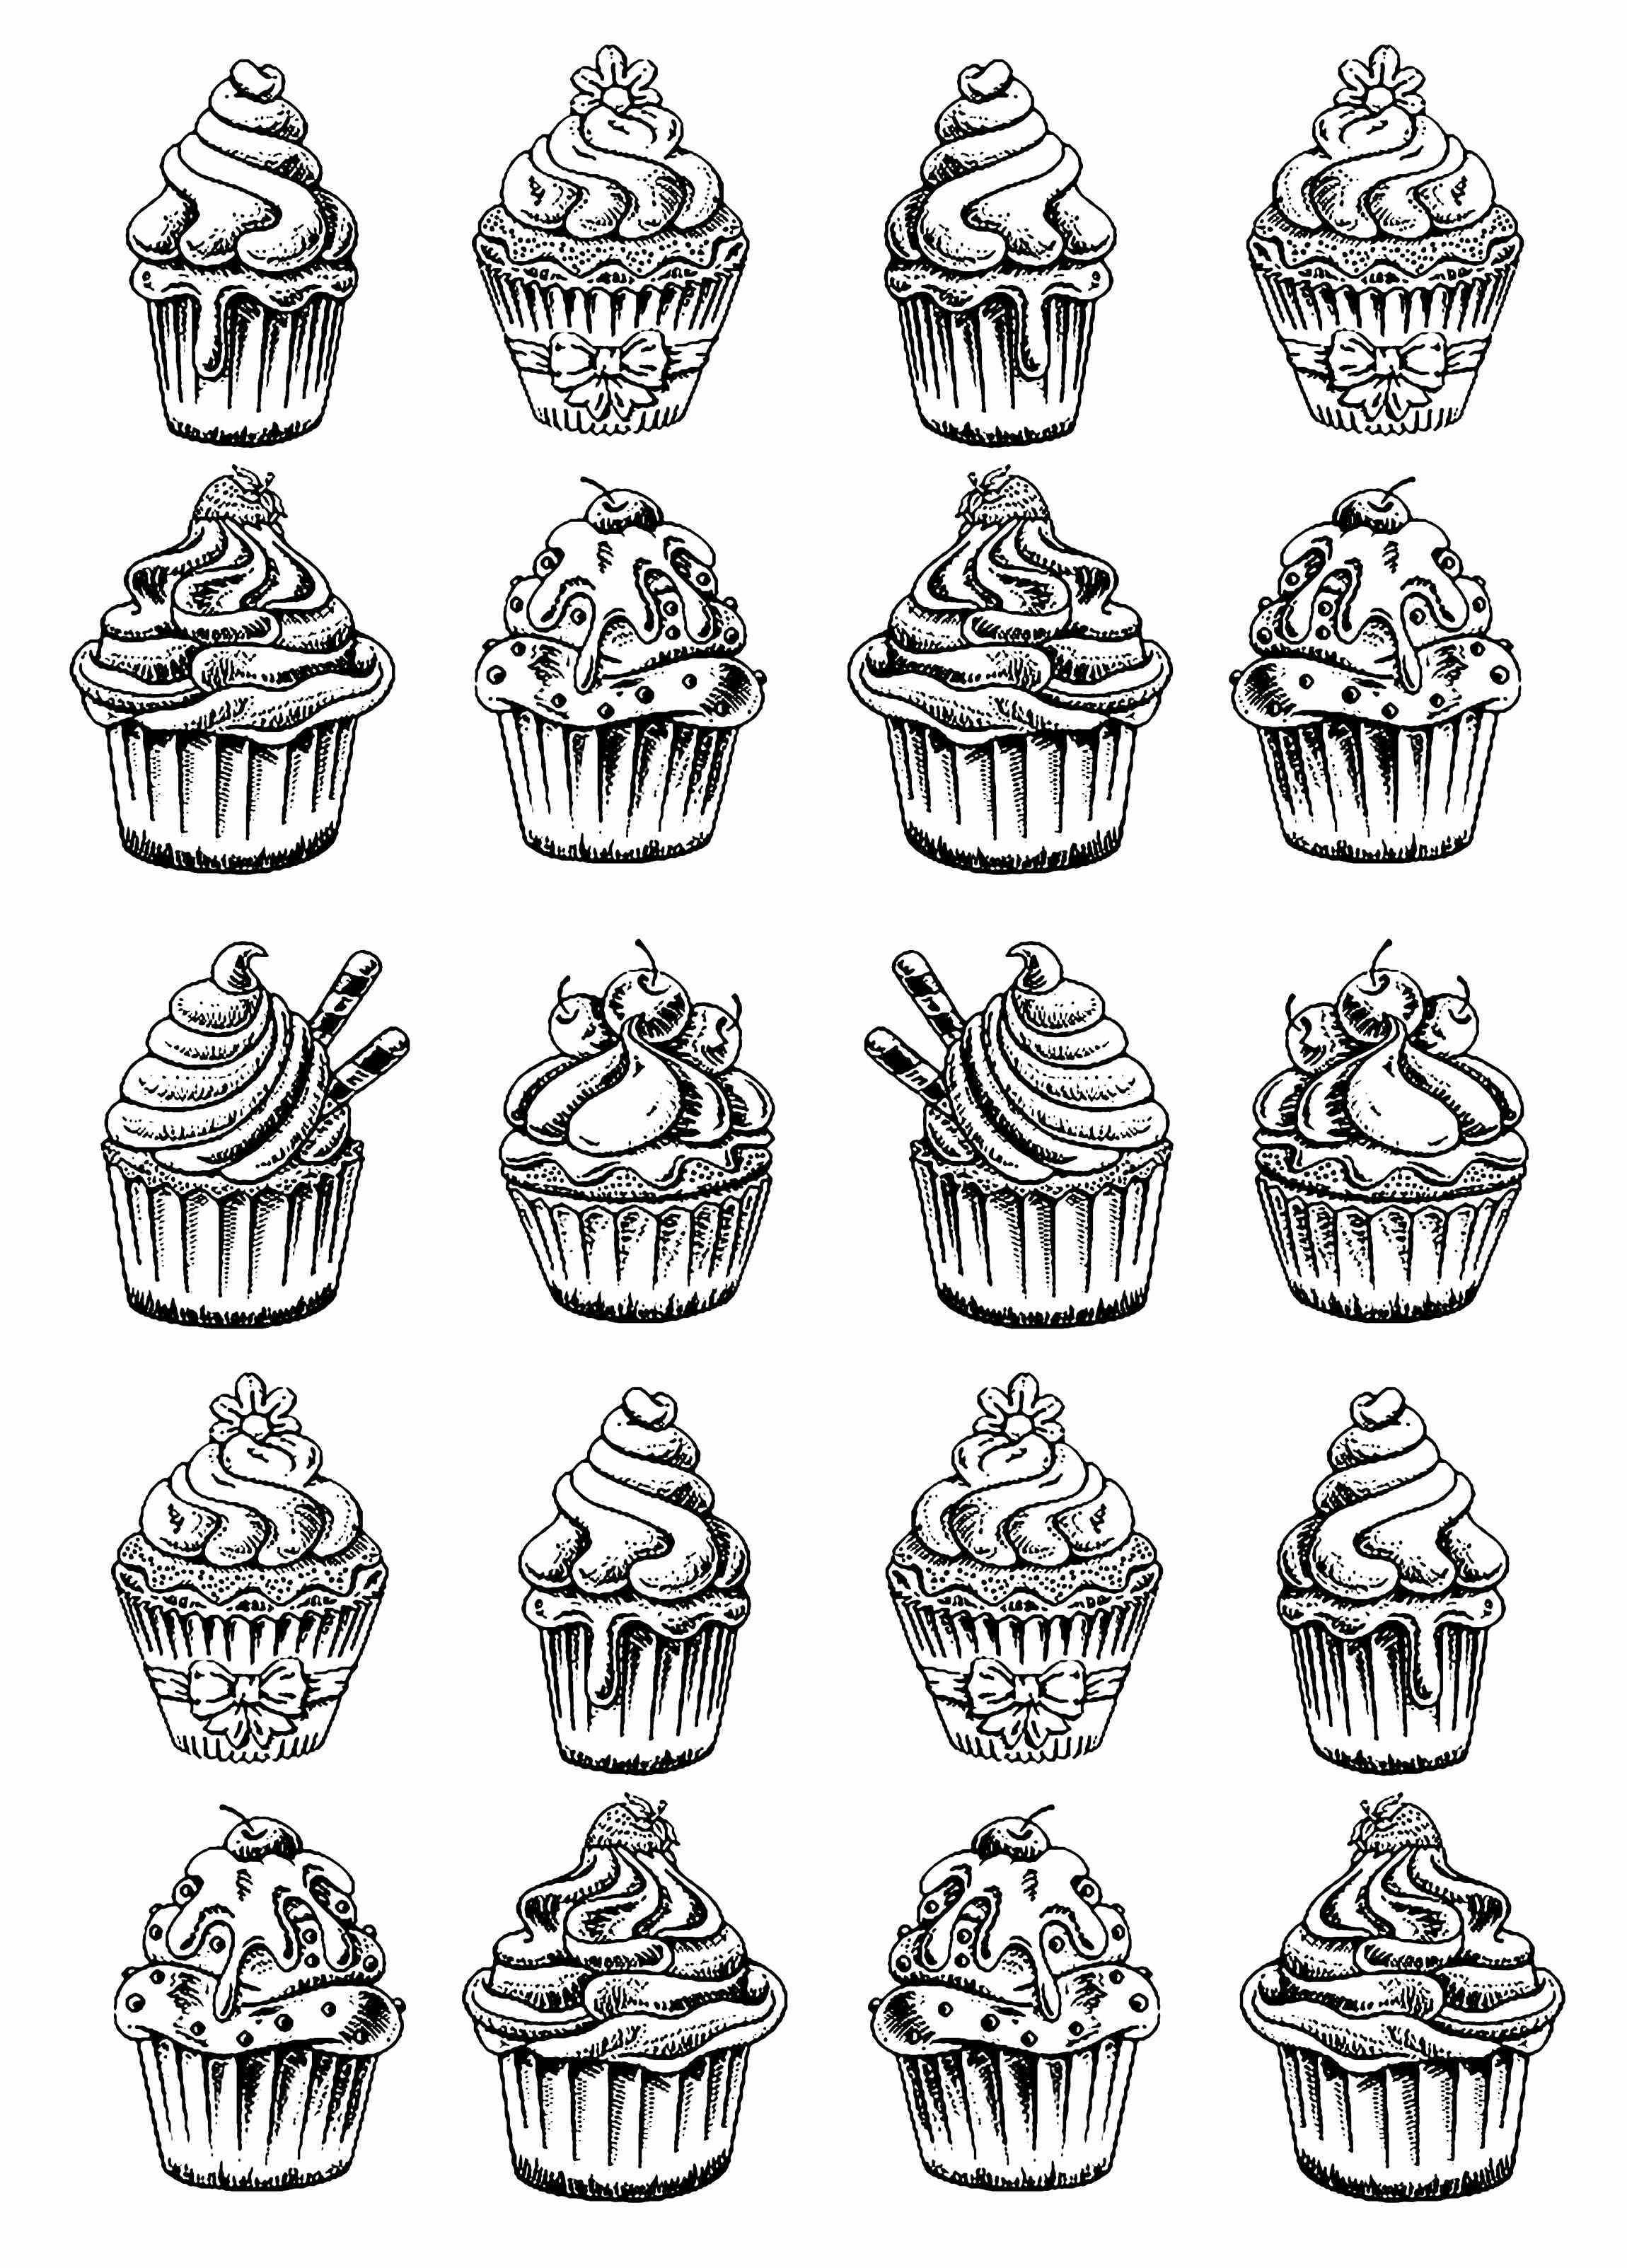 Exciting cupcake coloring